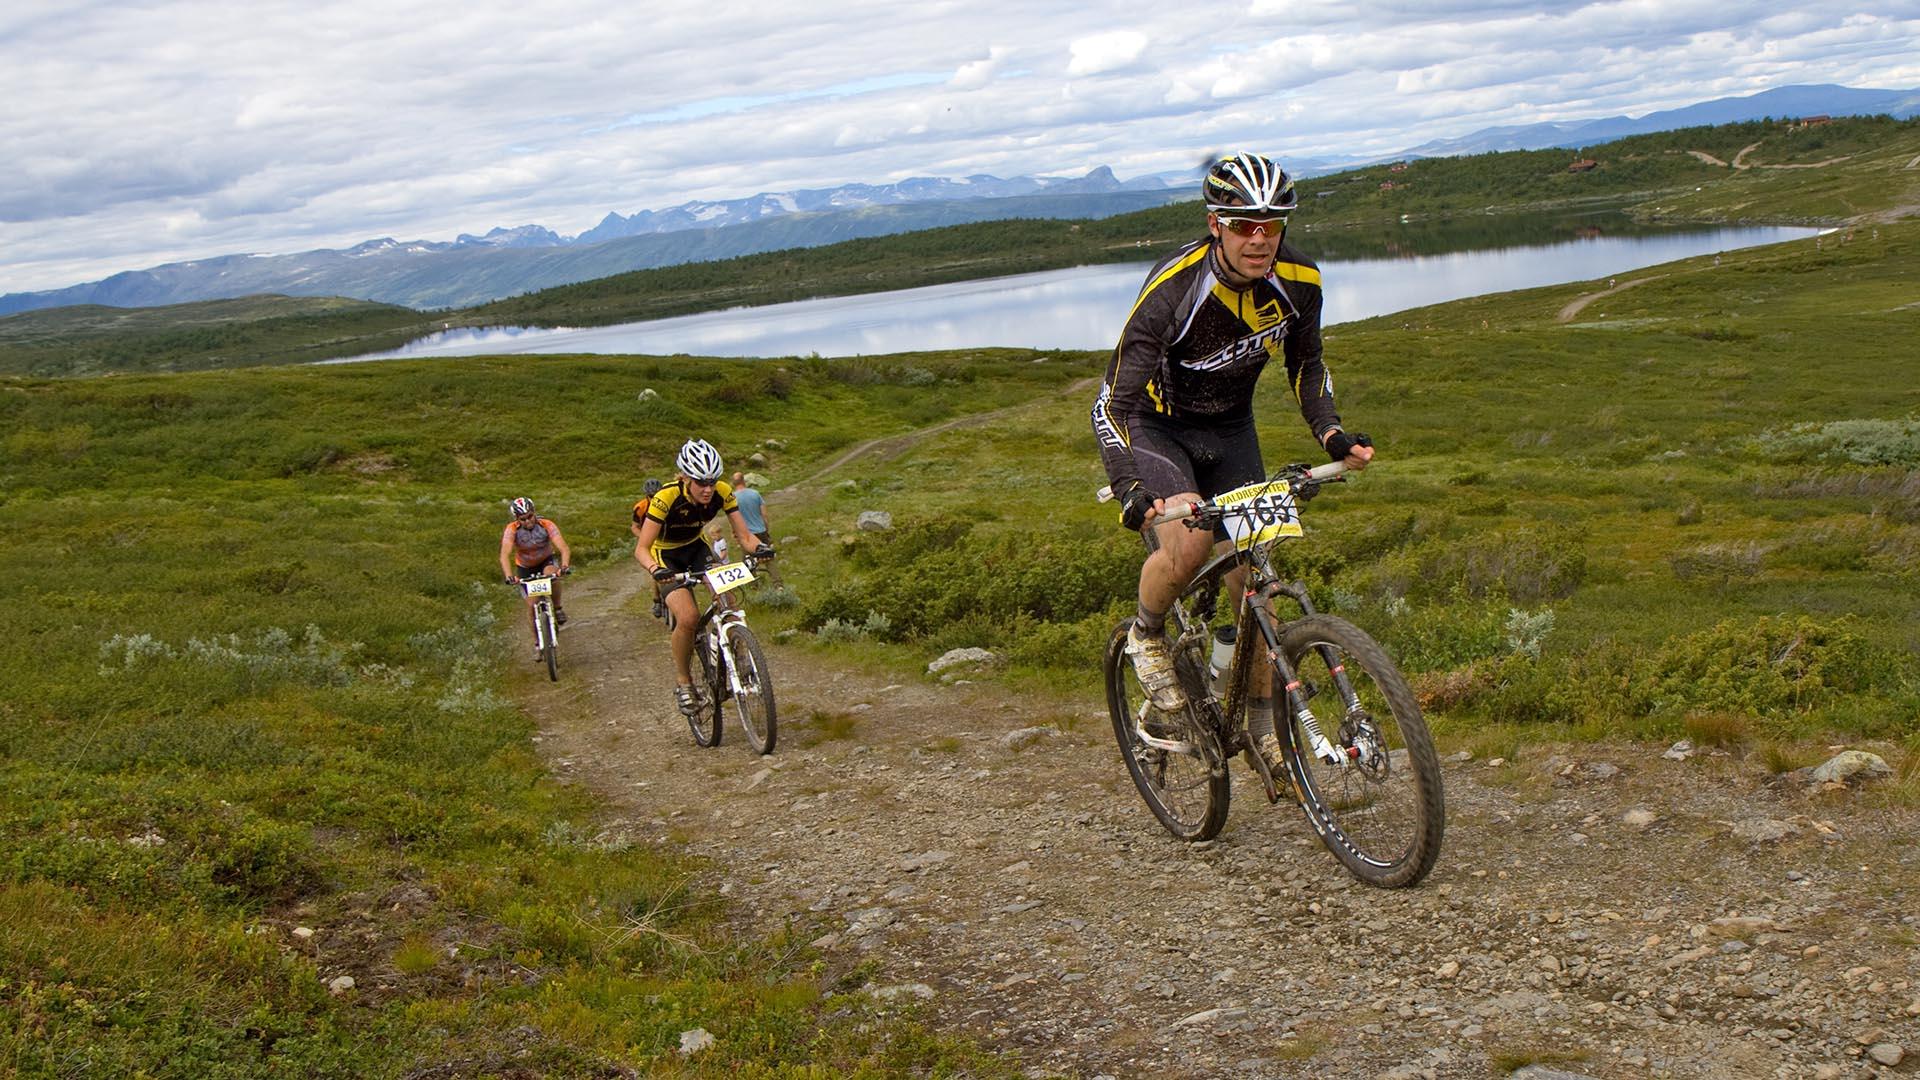 Offroad-cyclists during a mountain biking race in high country landscape